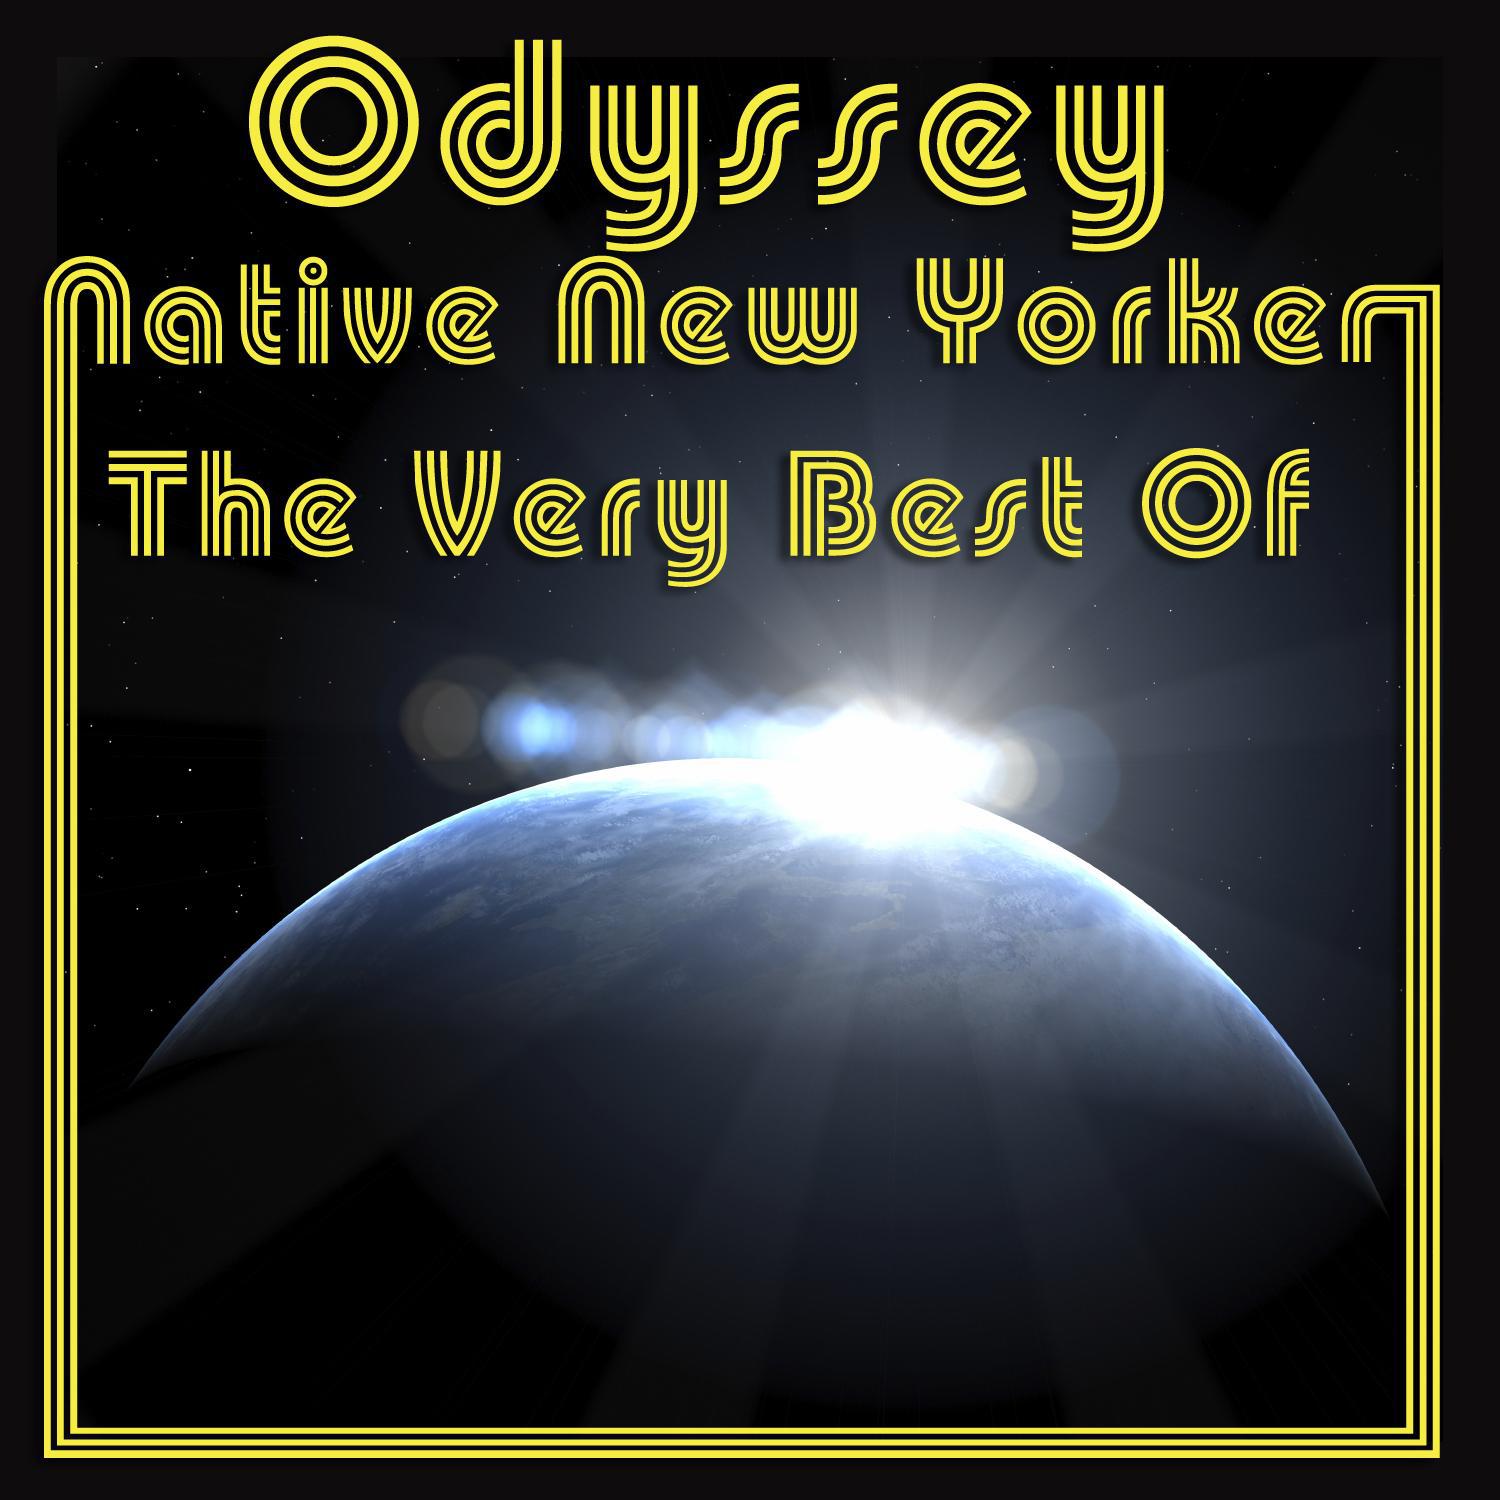 Native New Yorker - The Very Best Of专辑